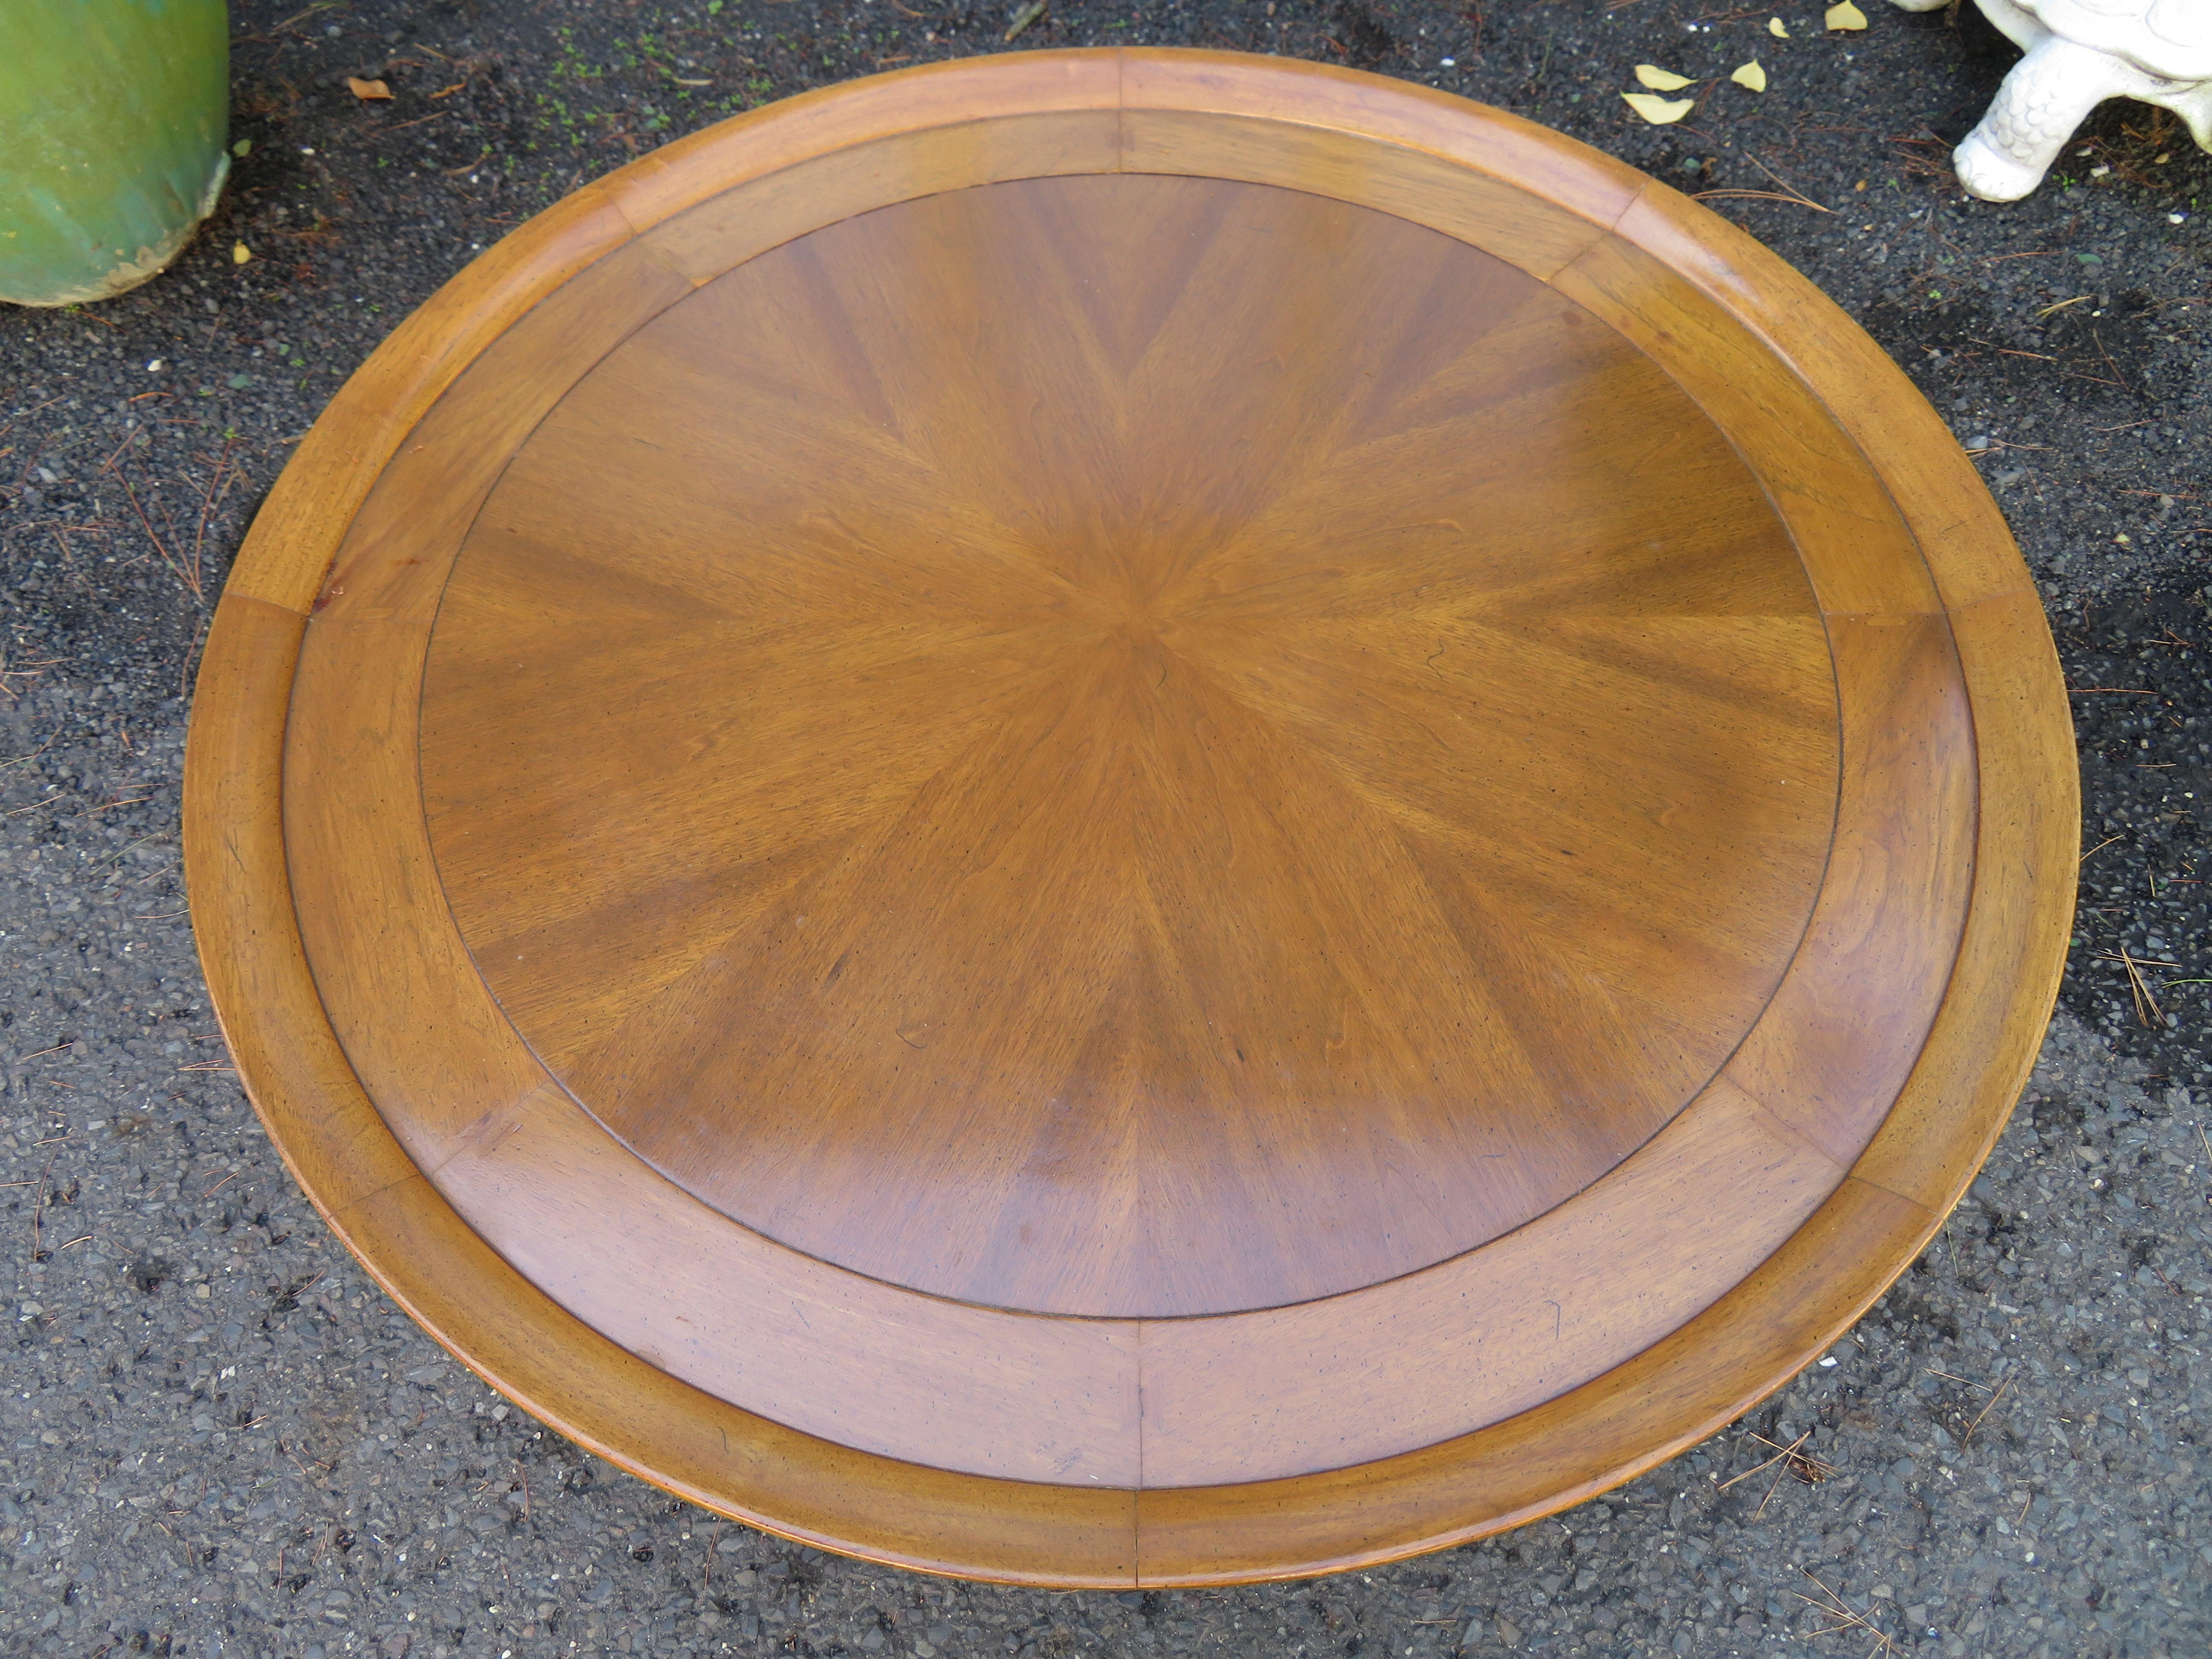 Lovely round coffee table part of the Sophisticate line by Tomlinson. This table features a coved top edge with a sunburst pattern figured butternut, and wood butterflies mortised into the joints. This table measures 16